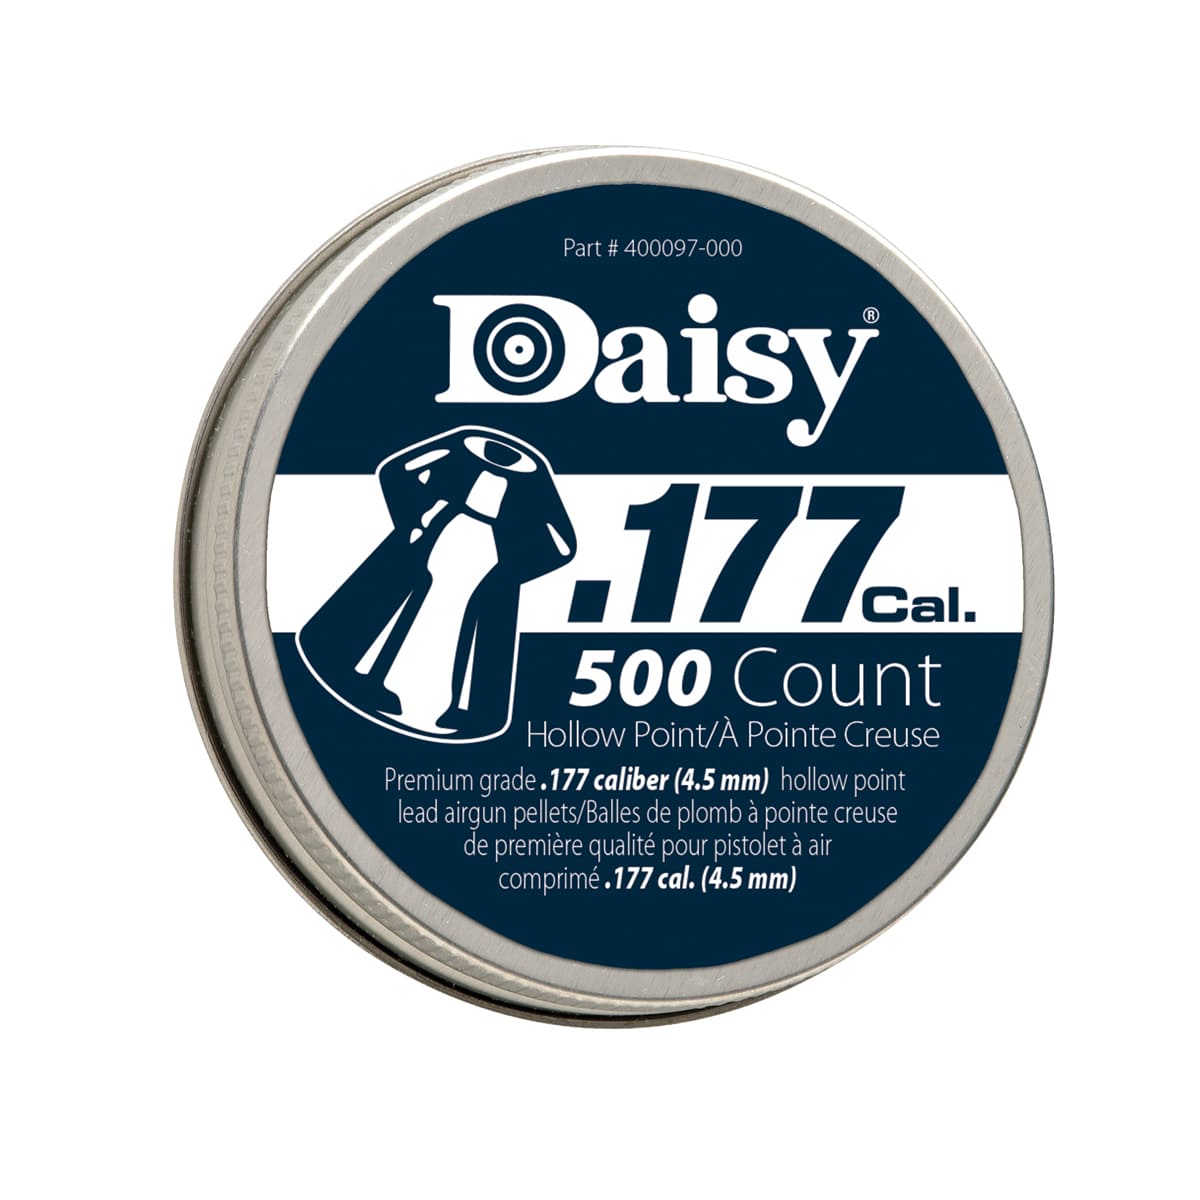 Daisy Hollow Point .177 Pellets - 500ct.